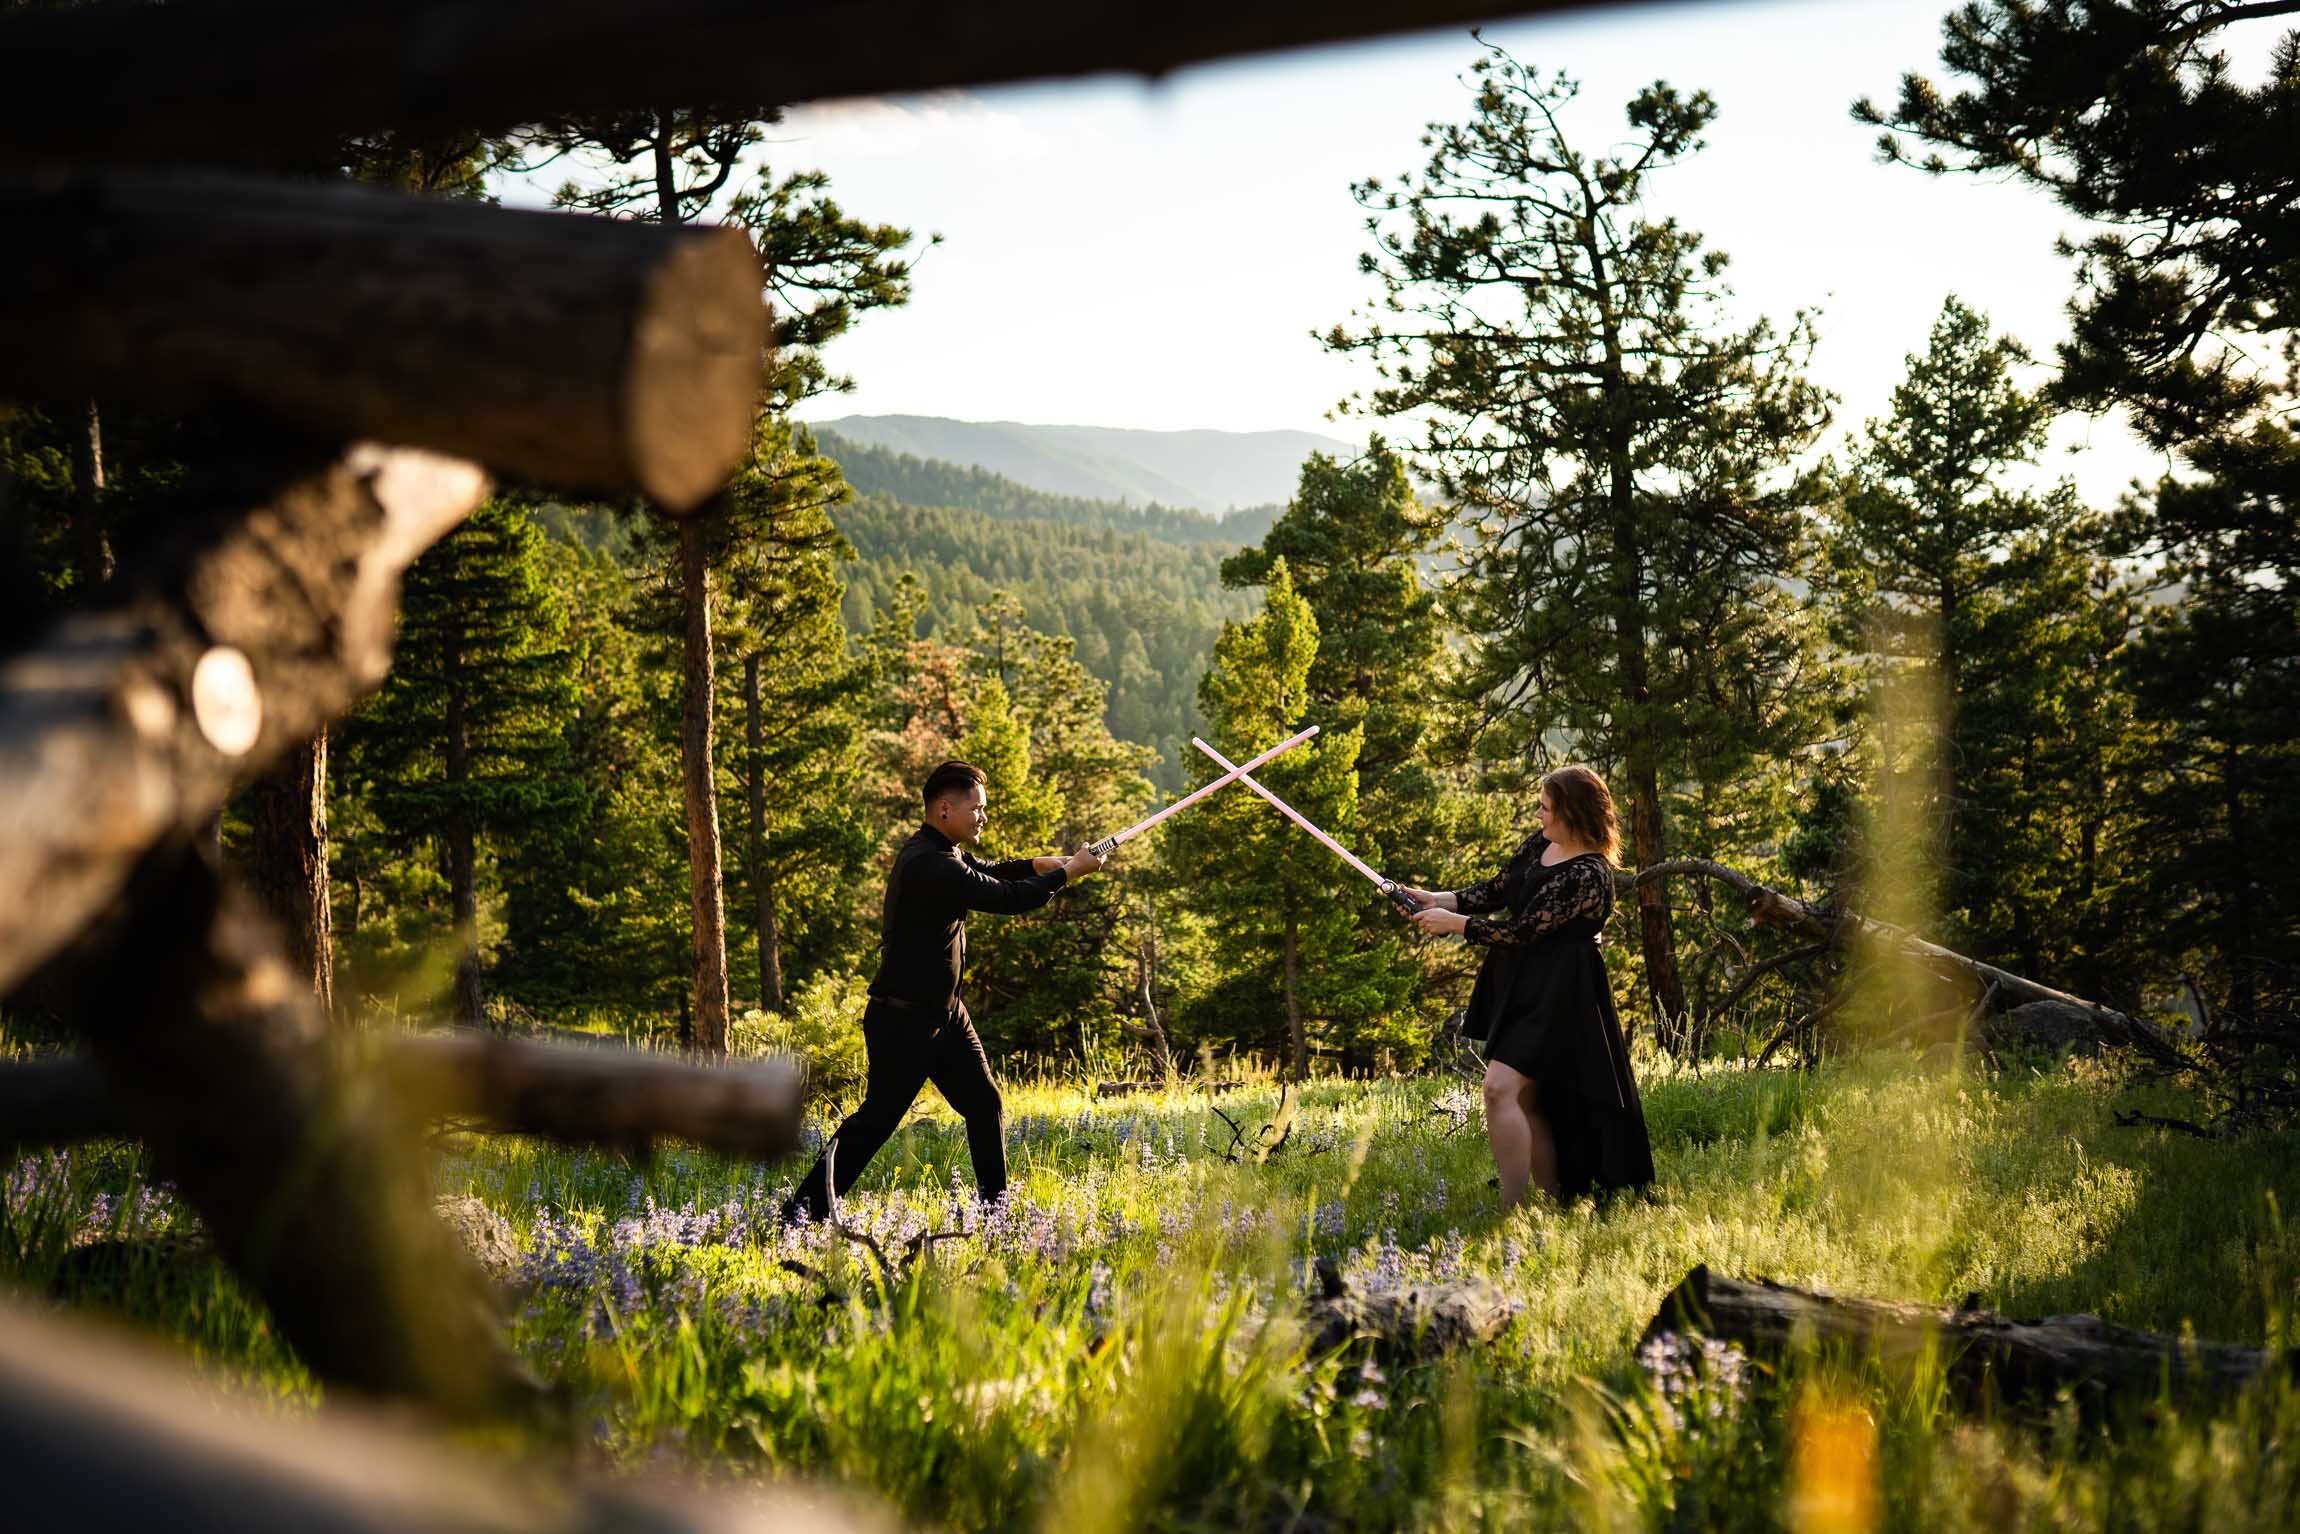 Engaged couple jumps into cosplay with their light sabers in the forest during golden hour, Engagement Session, Engagement Photos, Engagement Photos Inspiration, Engagement Photography, Engagement Photographer, Summer Engagement Photos, Mountain Engagement Photos, Lost Gulch Overlook engagement session, Lost Gulch Overlook engagement photos, Lost Gulch Overlook engagement photography, Lost Gulch Overlook engagement photographer, Lost Gulch Overlook  engagement inspiration, Boulder engagement session, Boulder engagement photos, Boulder engagement photography, Boulder engagement photographer, Boulder engagement inspiration, Colorado engagement session, Colorado engagement photos, Colorado engagement photography, Colorado engagement photographer, Colorado engagement inspiration